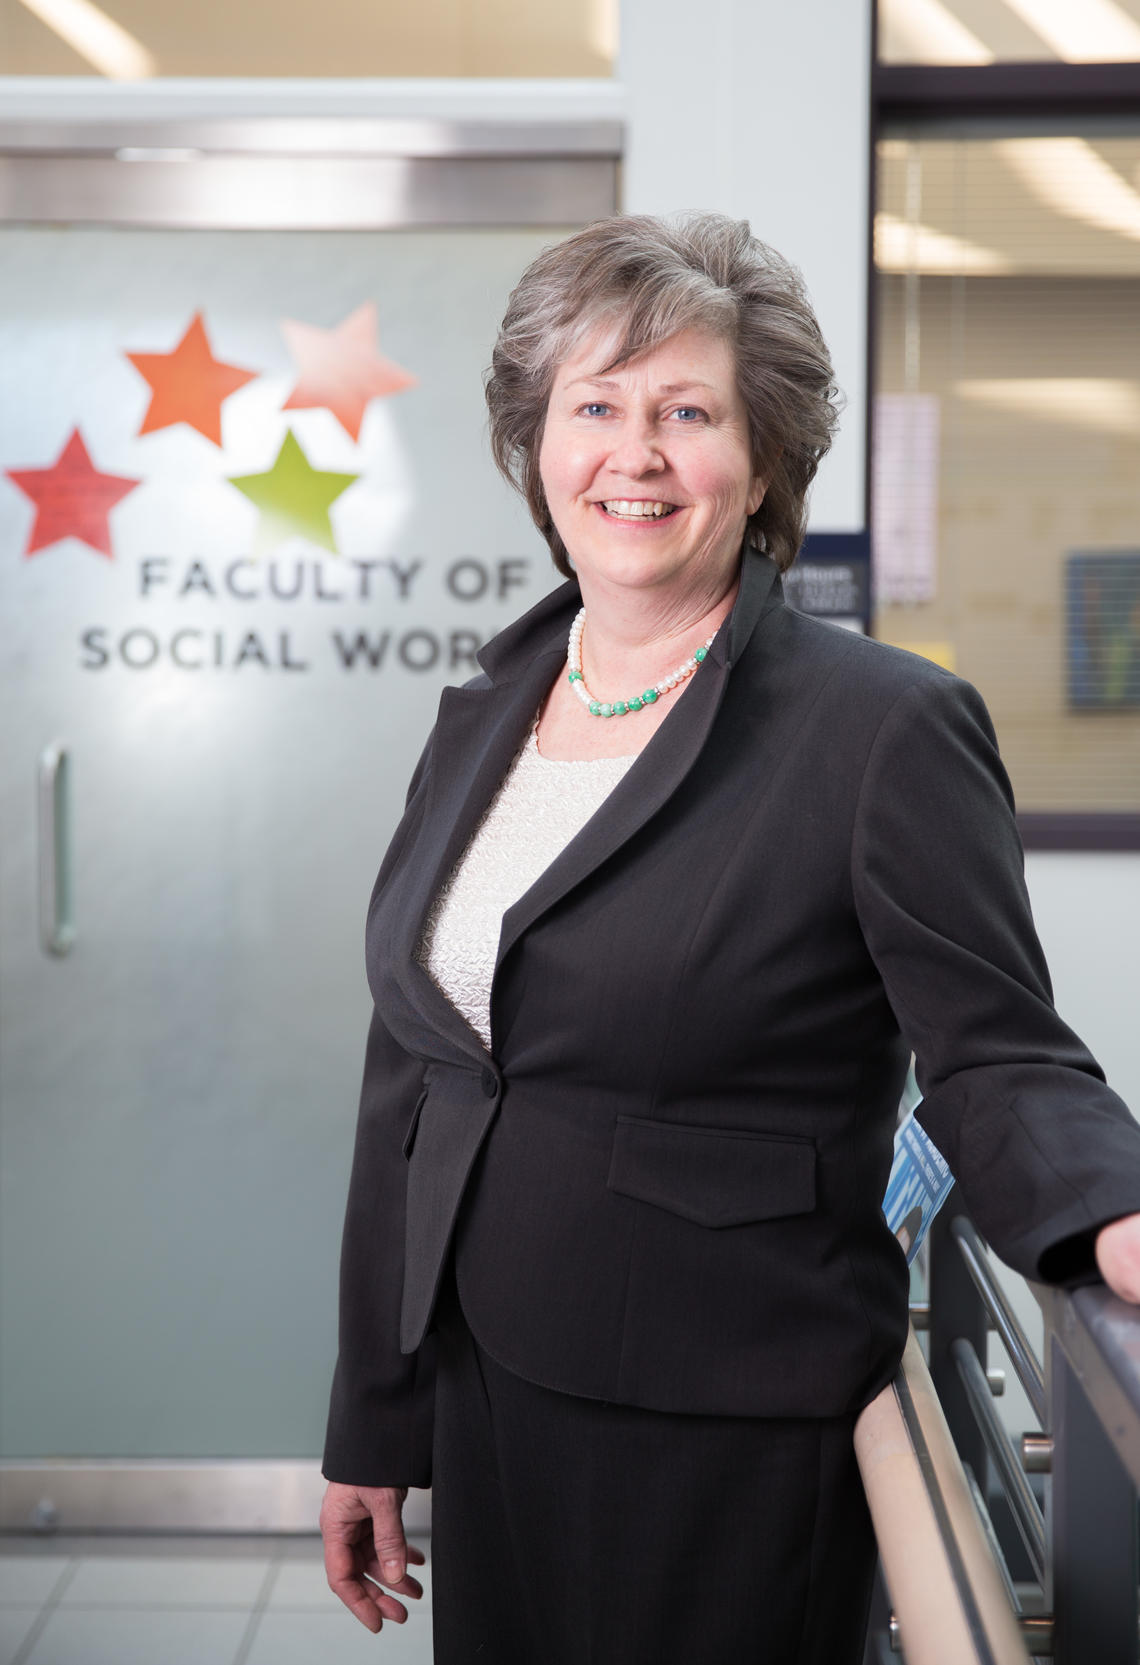 Ellen Perrault, associate dean (teaching and learning) in the Faculty of Social Work, received the Award for Educational Leadership (Individual, Formal Role)